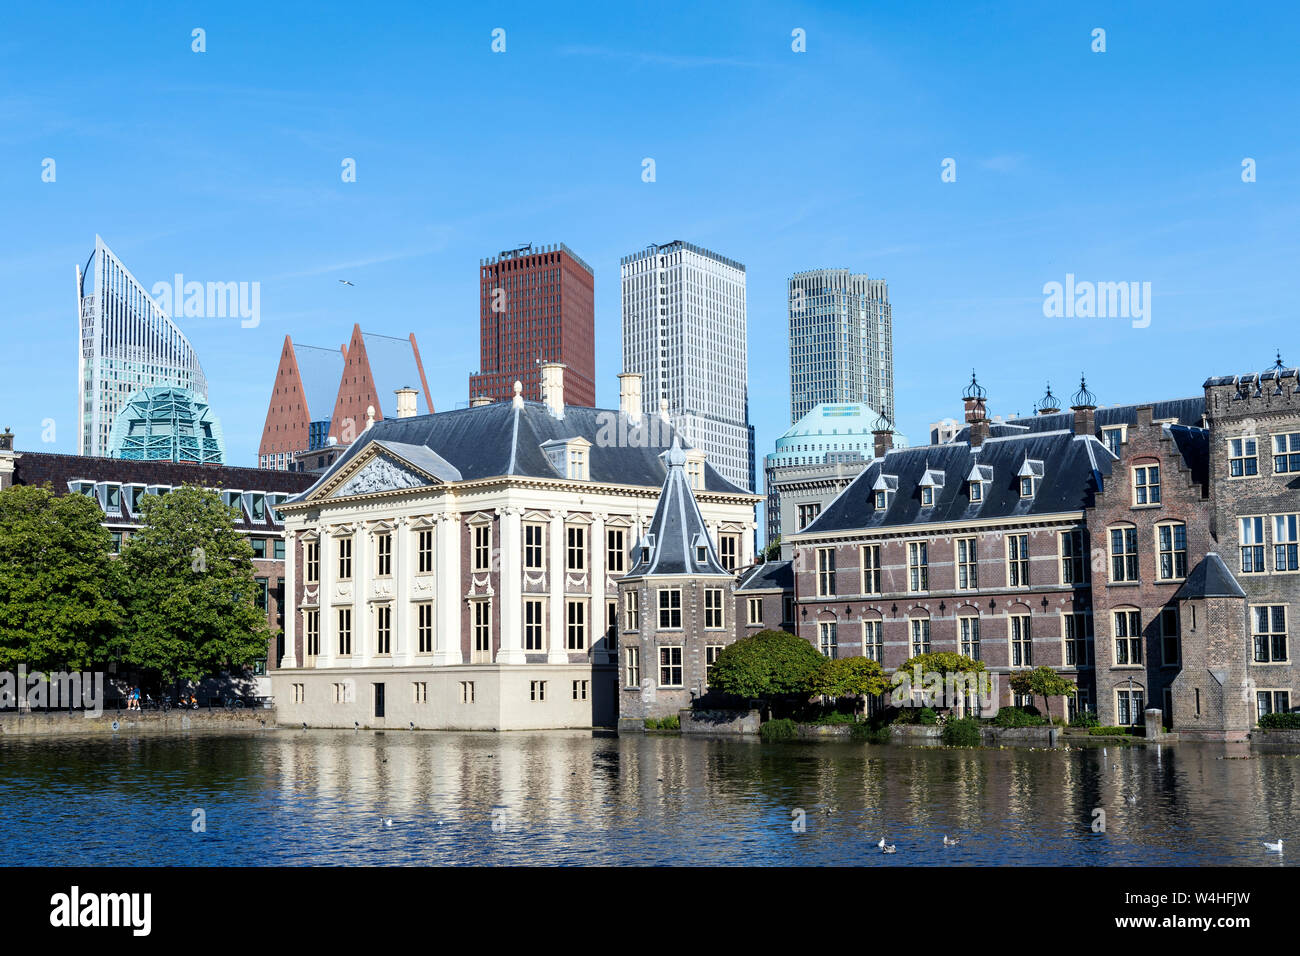 Hague Mauritshuis small tower of the binnenhof and skyscrapers.- Image Stock Photo